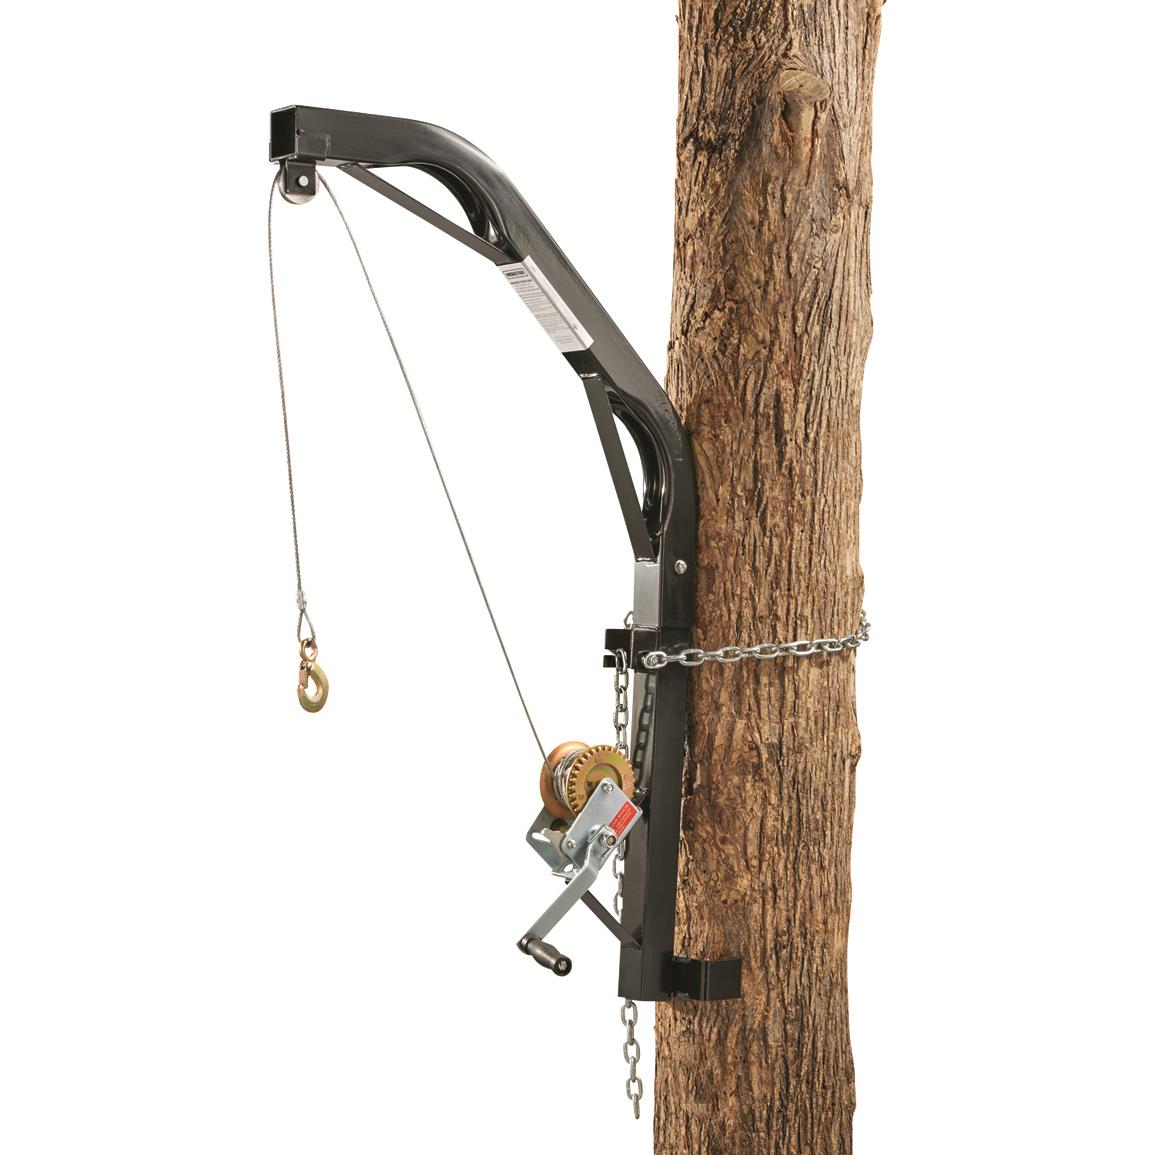 Attaches easily to any tree or pole